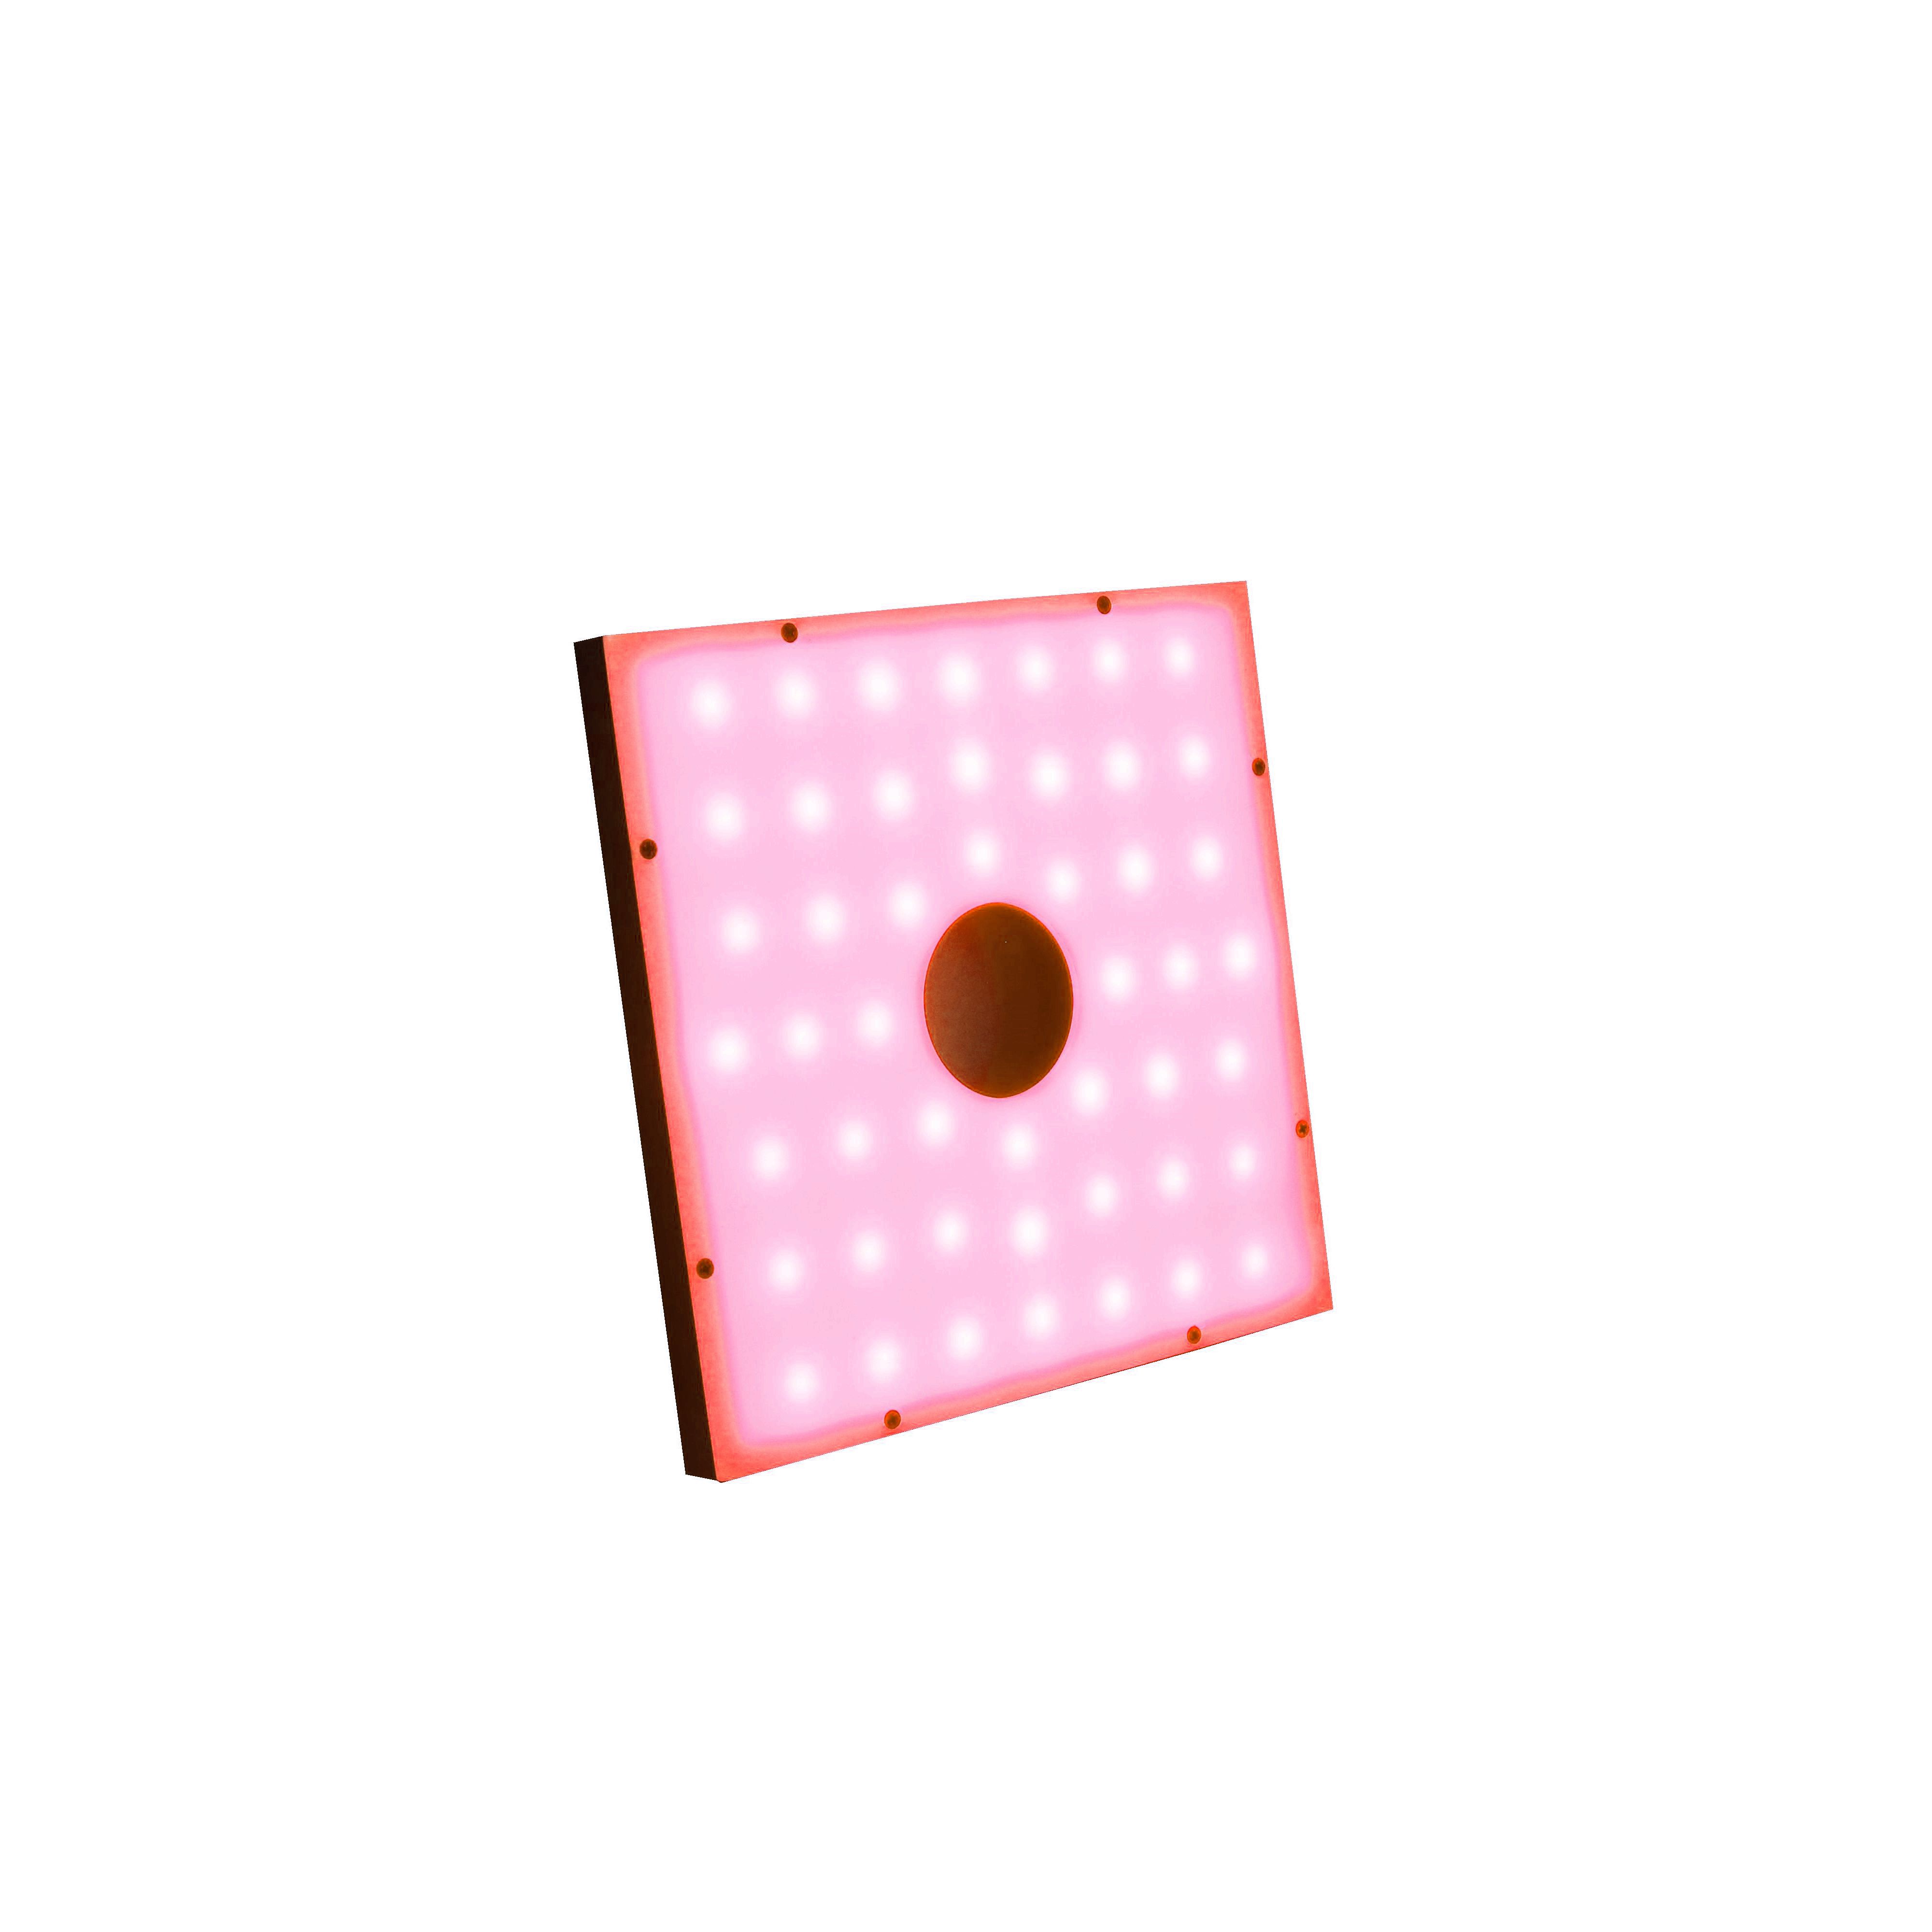 DSQ2-150/150 Diffused Square Panel Lights – Red